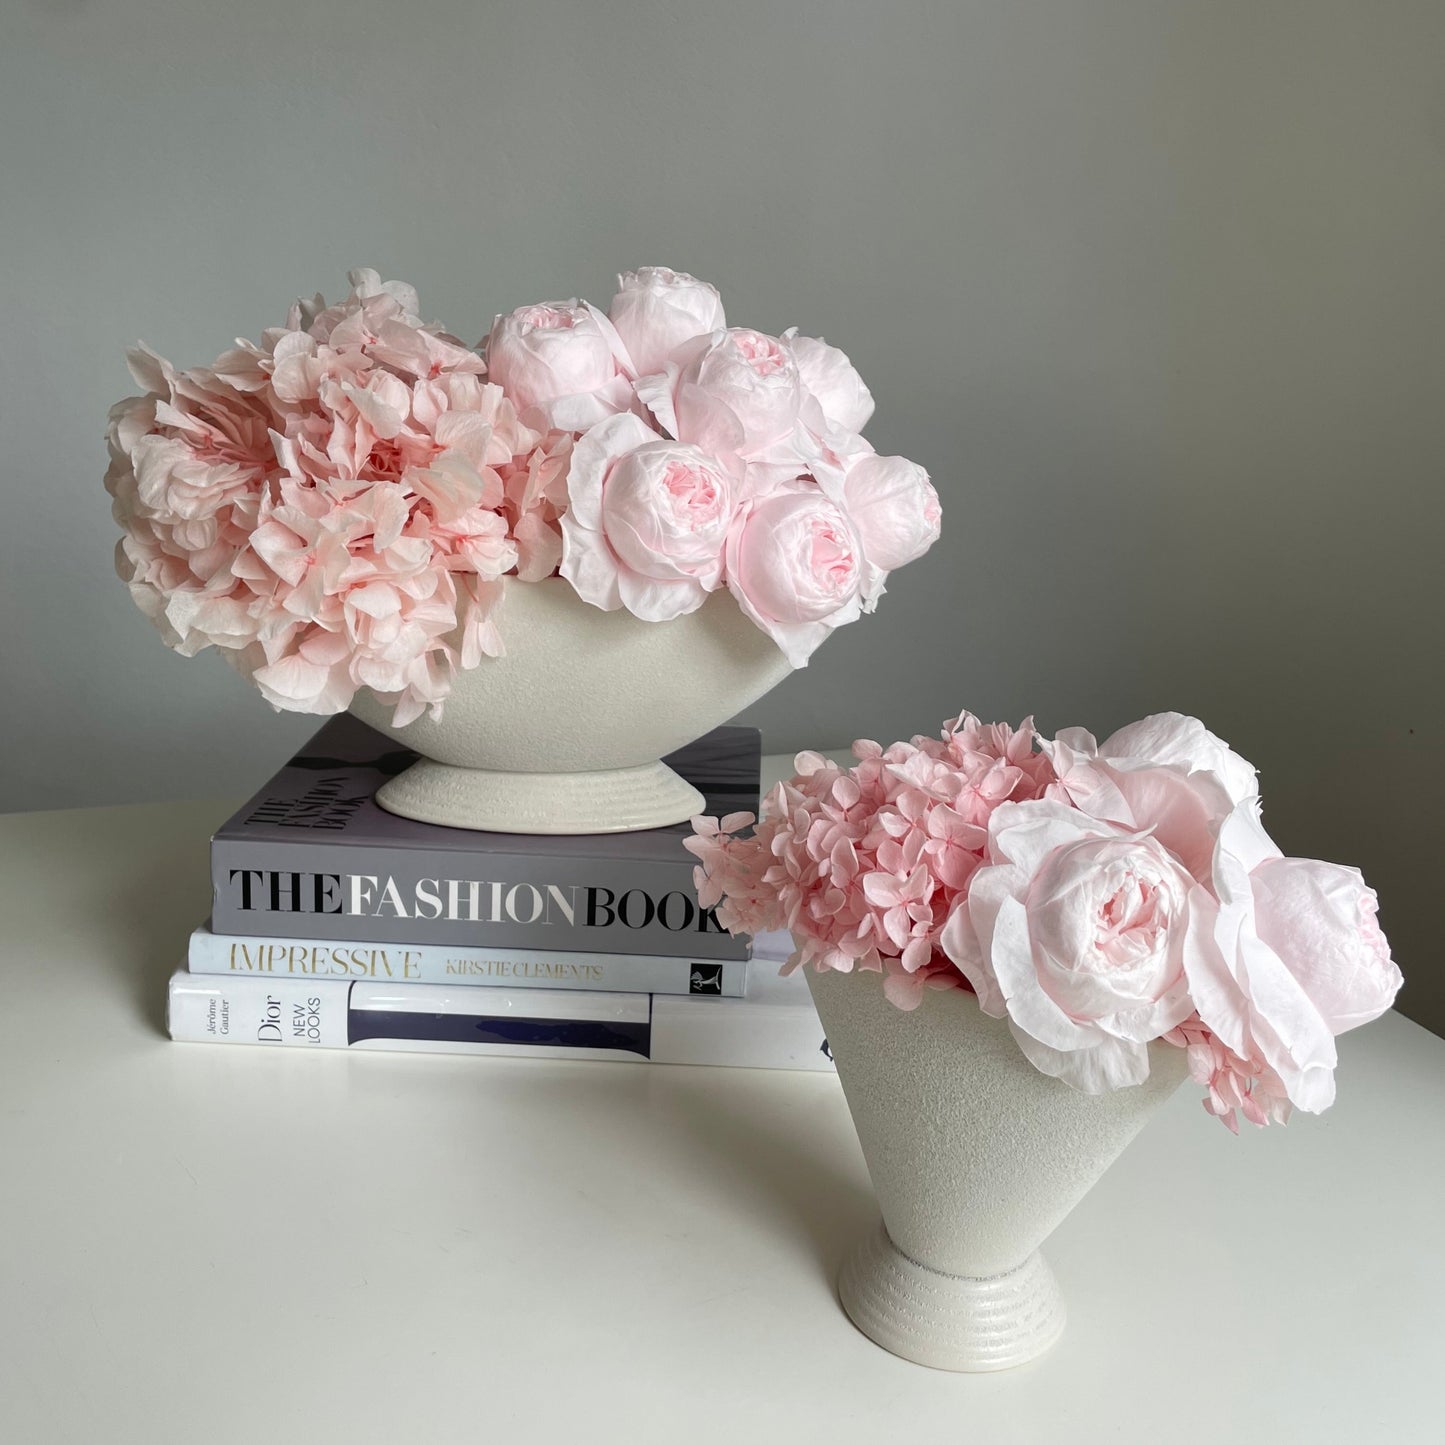 Everlasting pink peonies in white pot